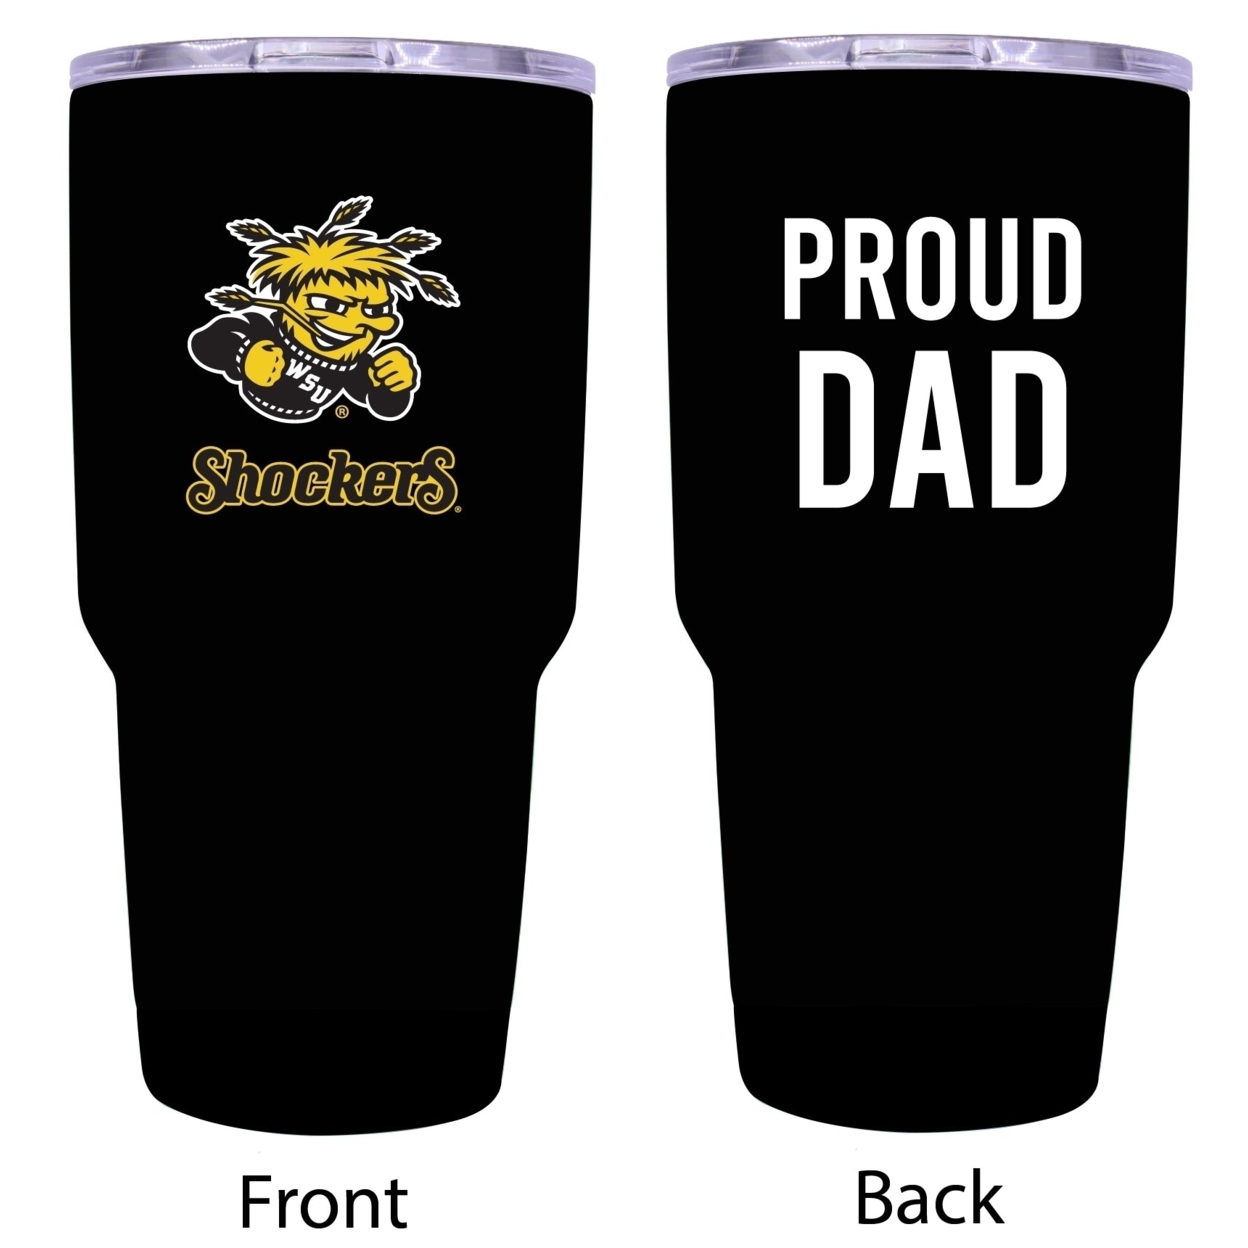 Wichita State Shockers Proud Dad 24 Oz Insulated Stainless Steel Tumblers Choose Your Color. - Black